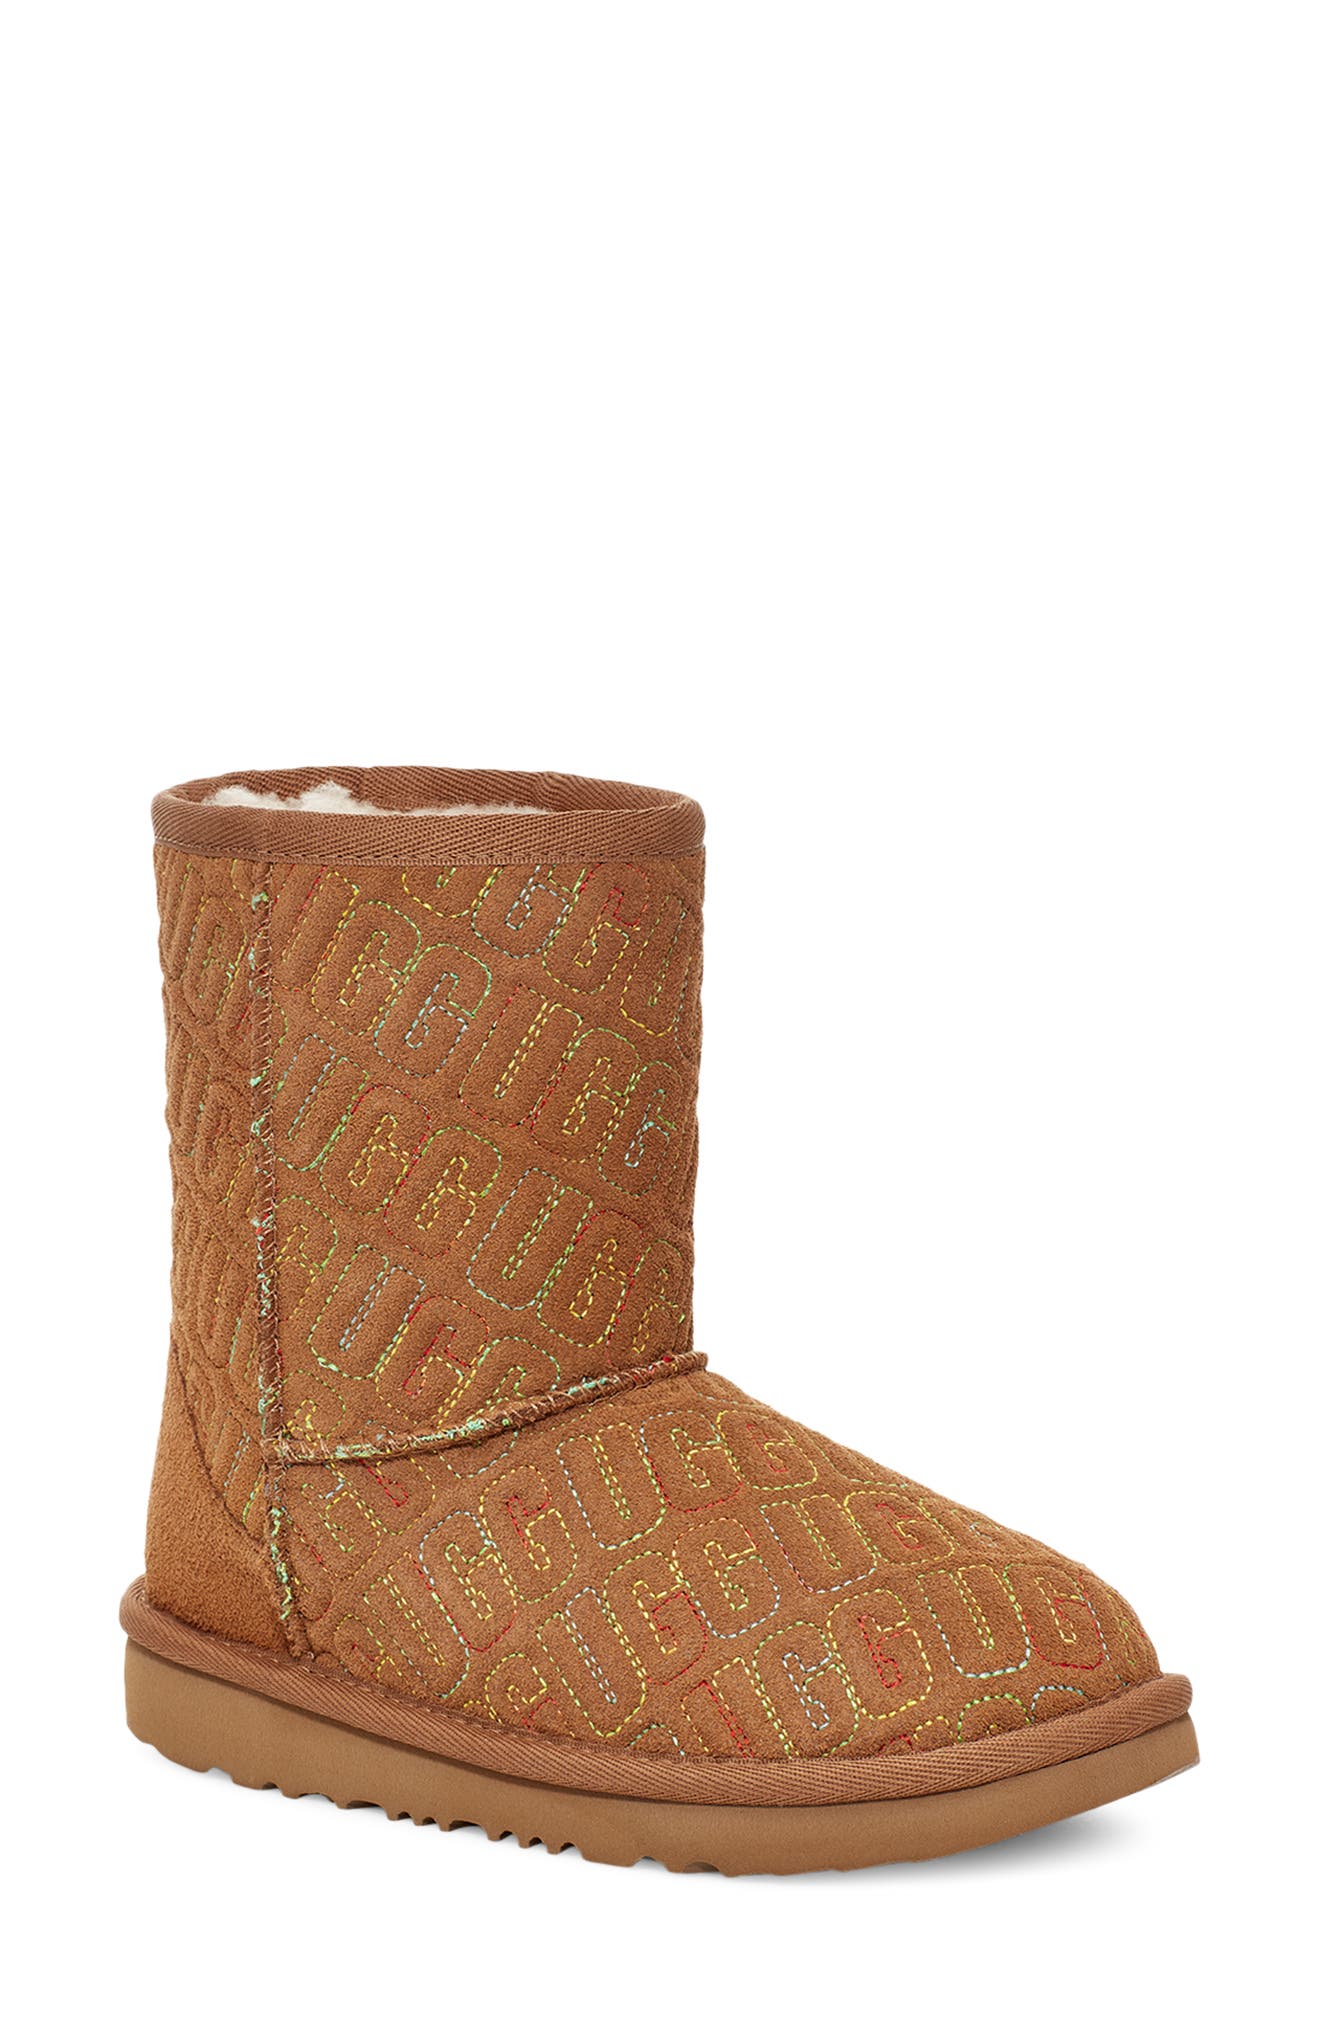 nordstrom baby ugg boots